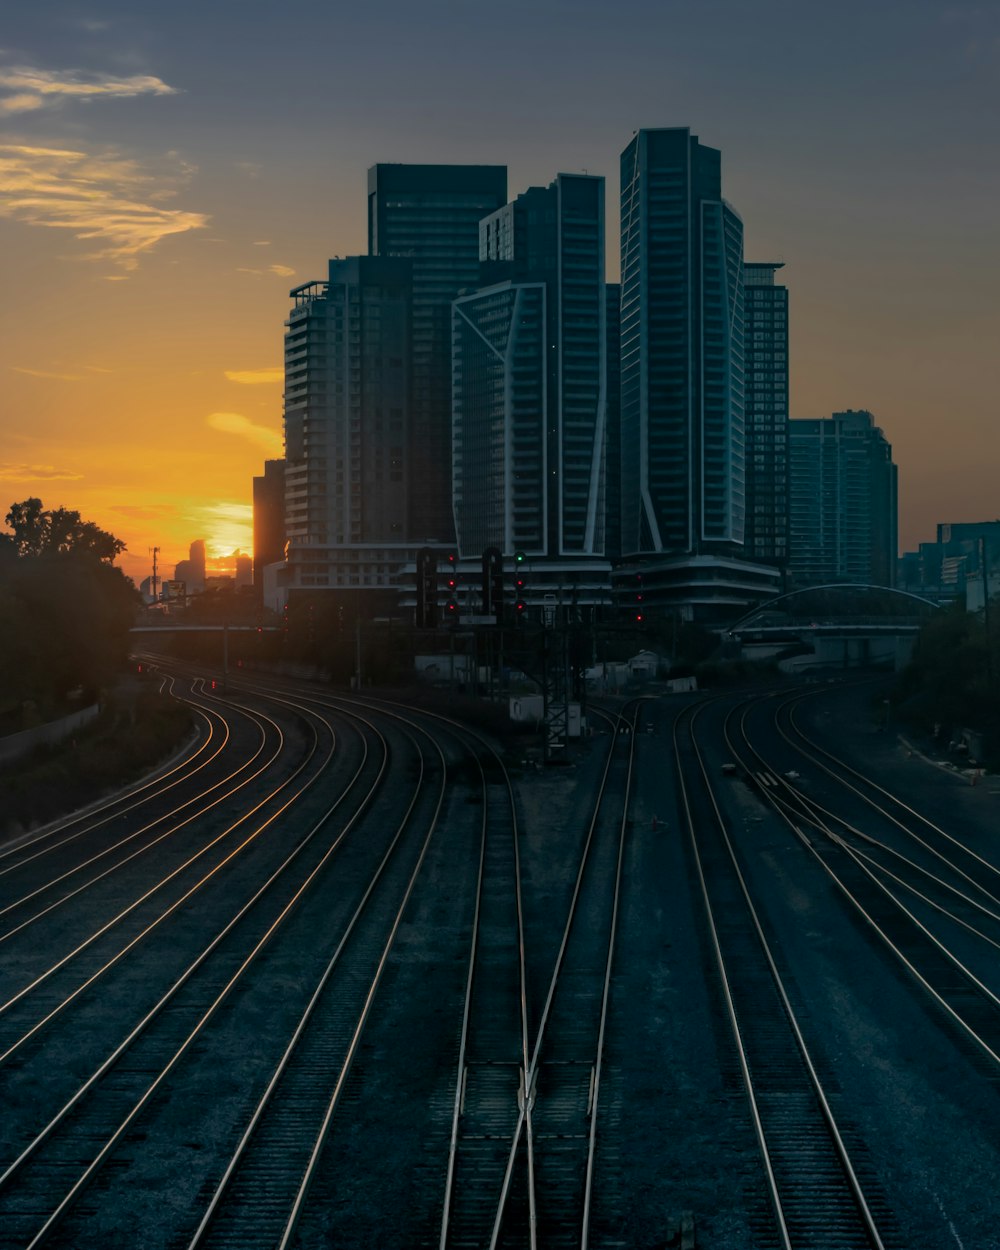 a sunset view of a train track with buildings in the background